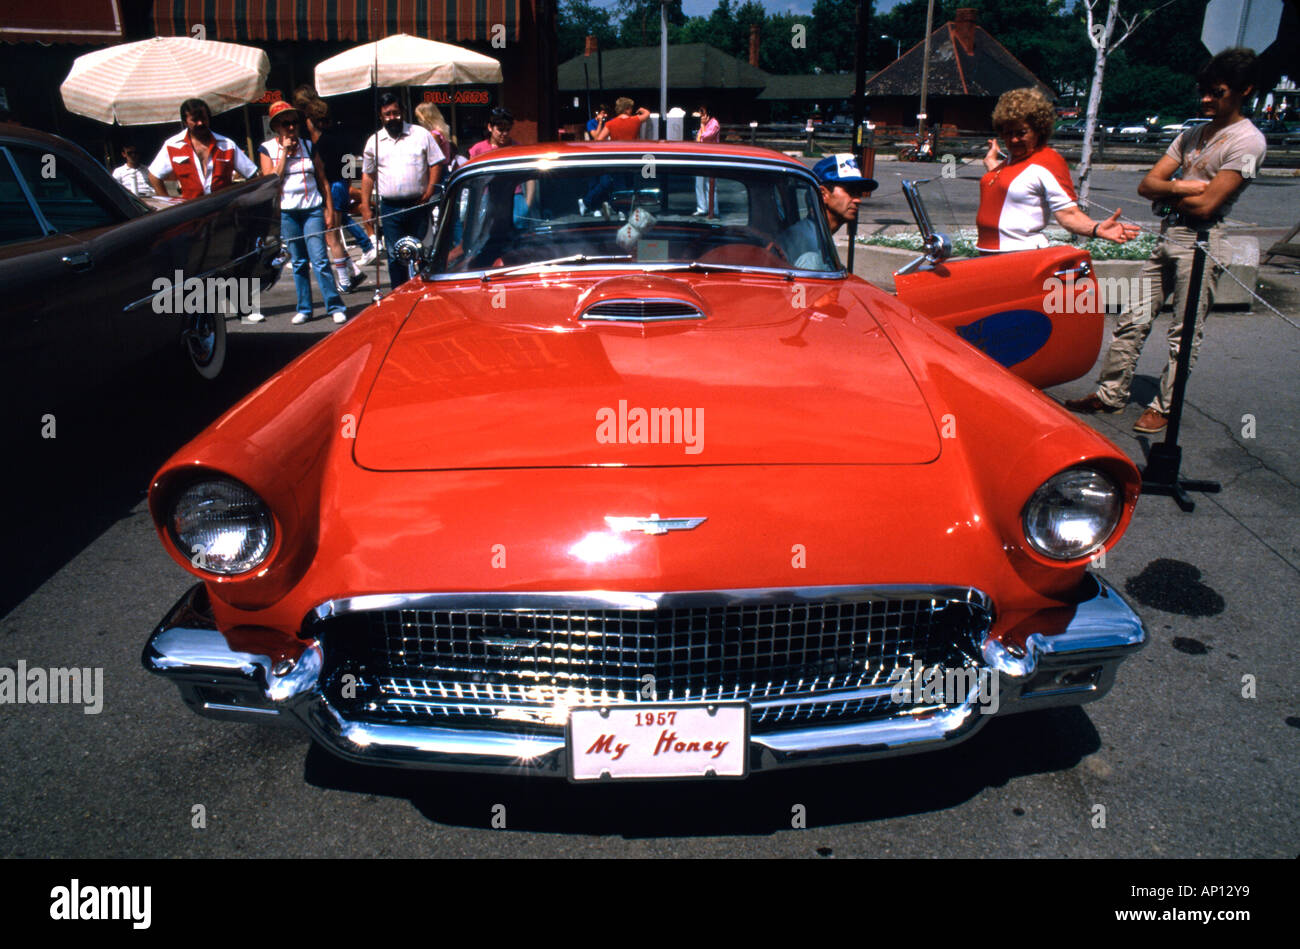 Classic Ford Thunderbird at American car show Stock Photo